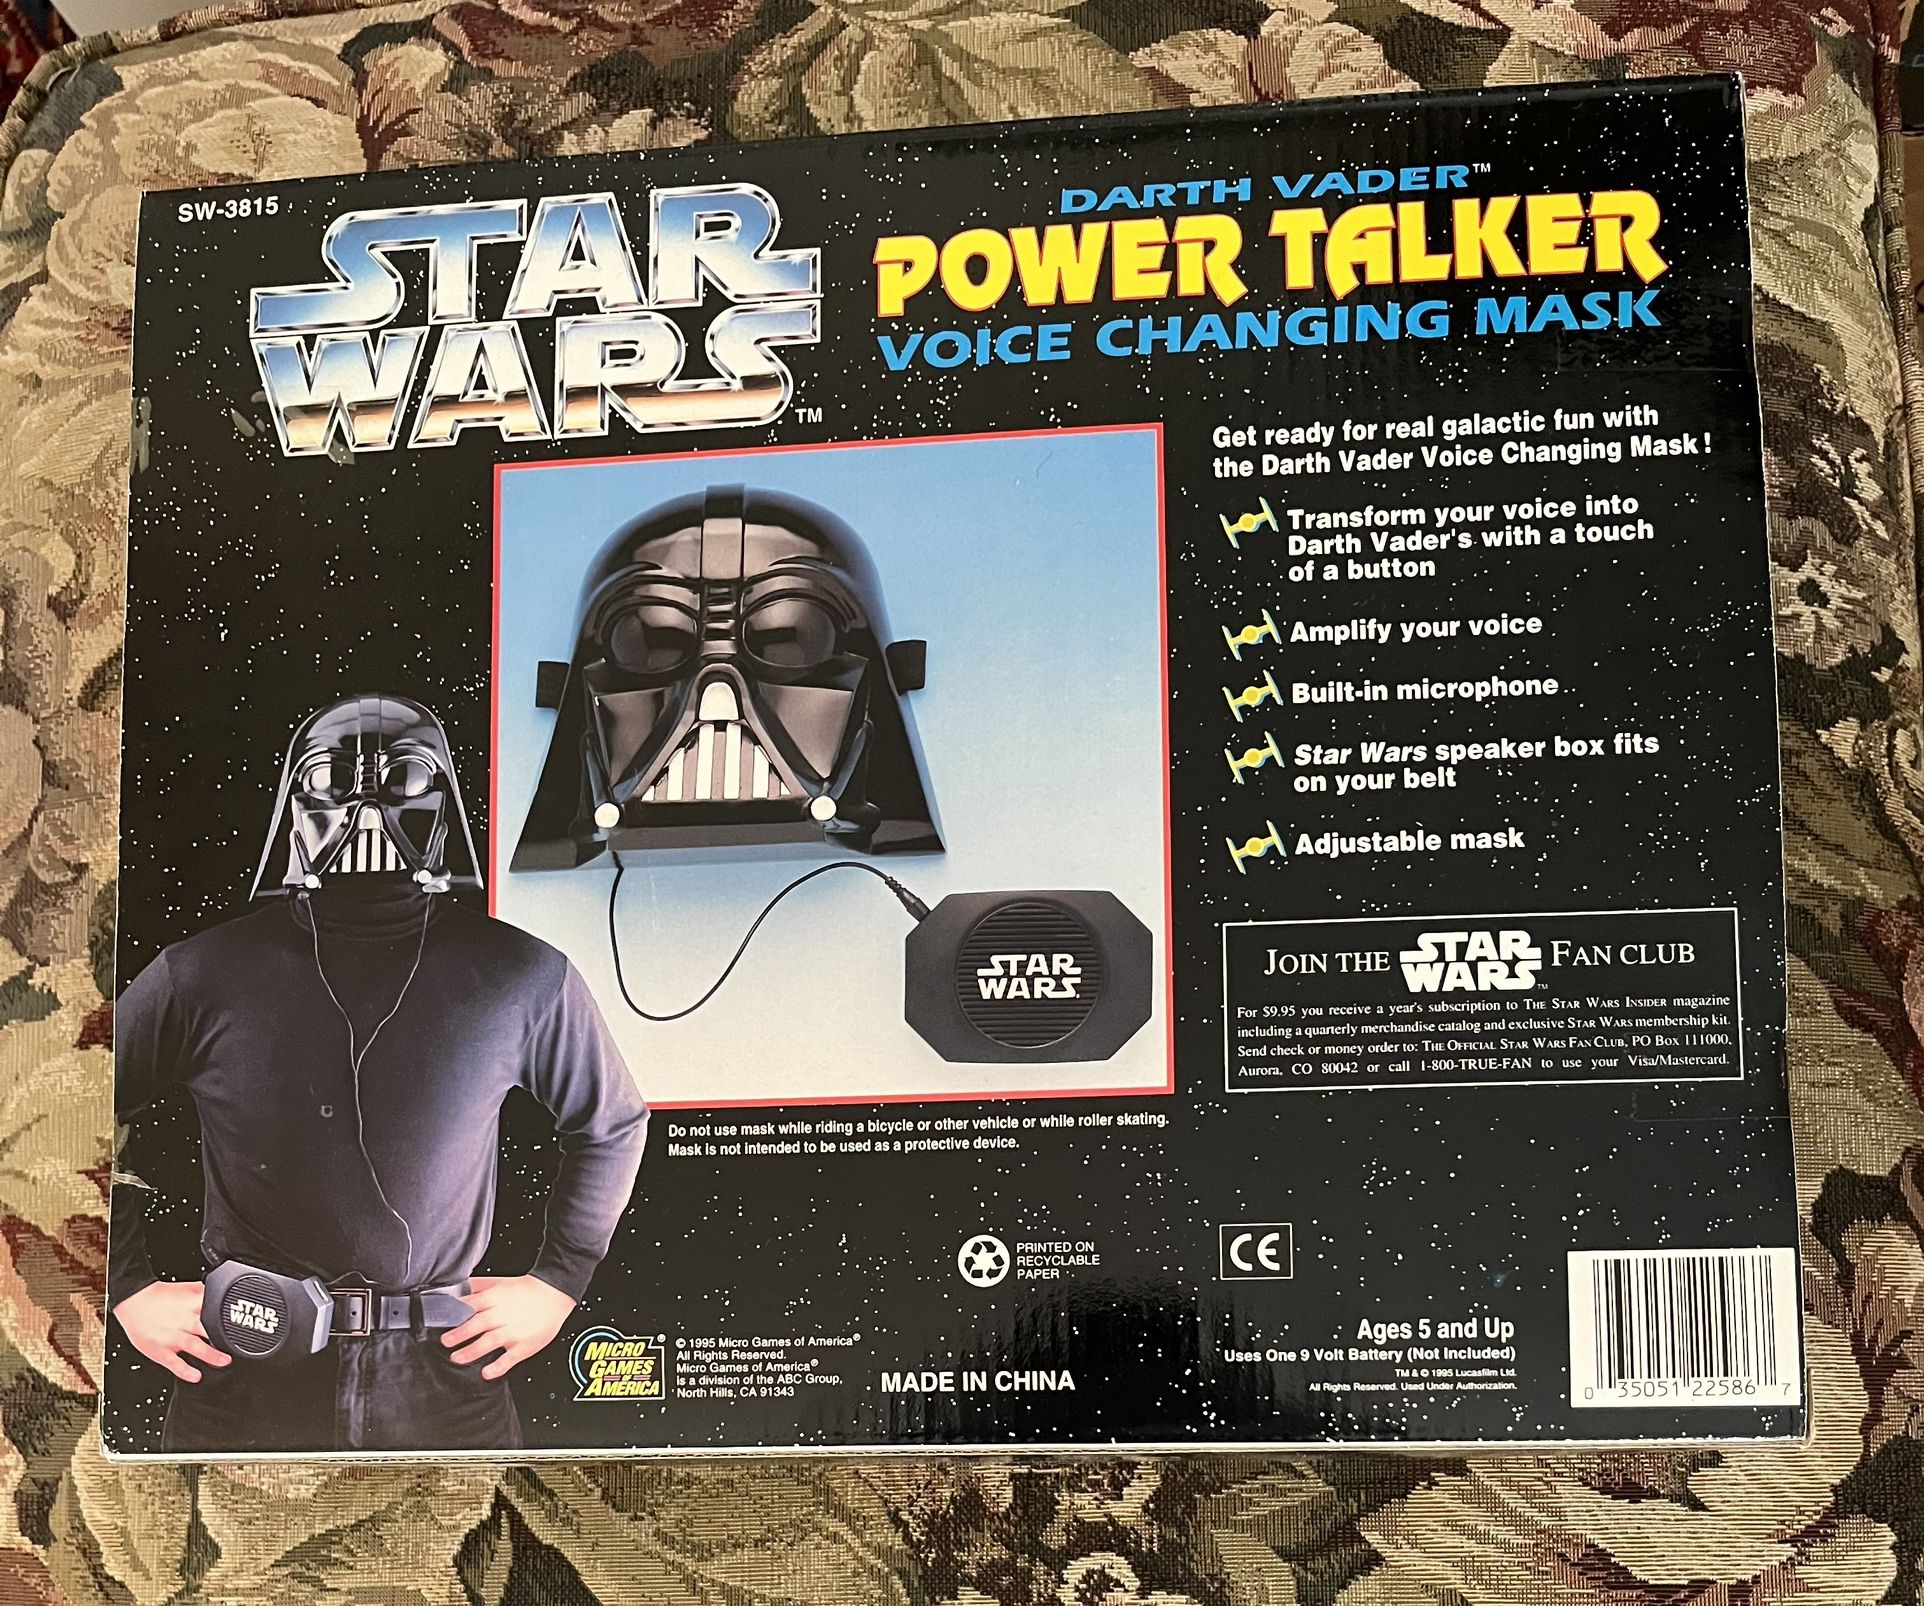 TWO STAR WARS DARTH VADER POWER TALKER VOICE CHANGING MASK NEW IN BOXES 1995